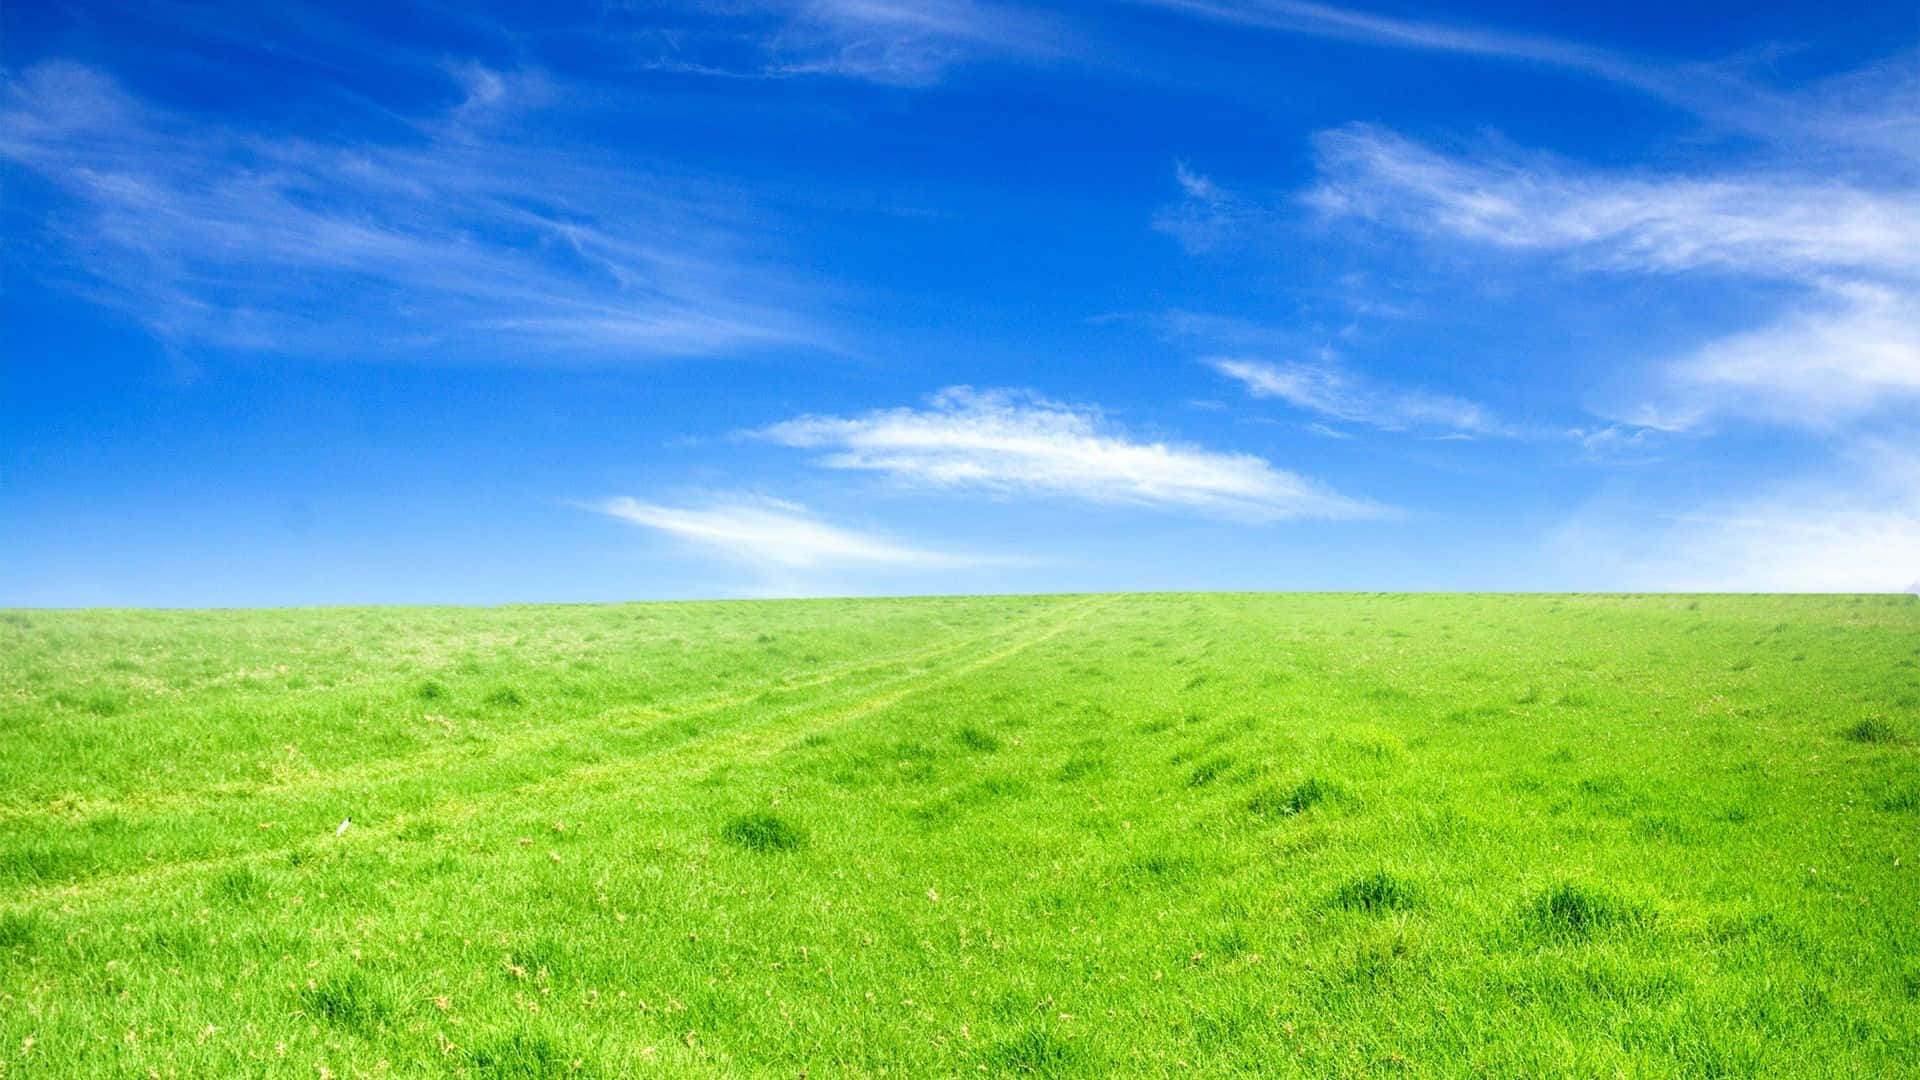 blue sky background with grass